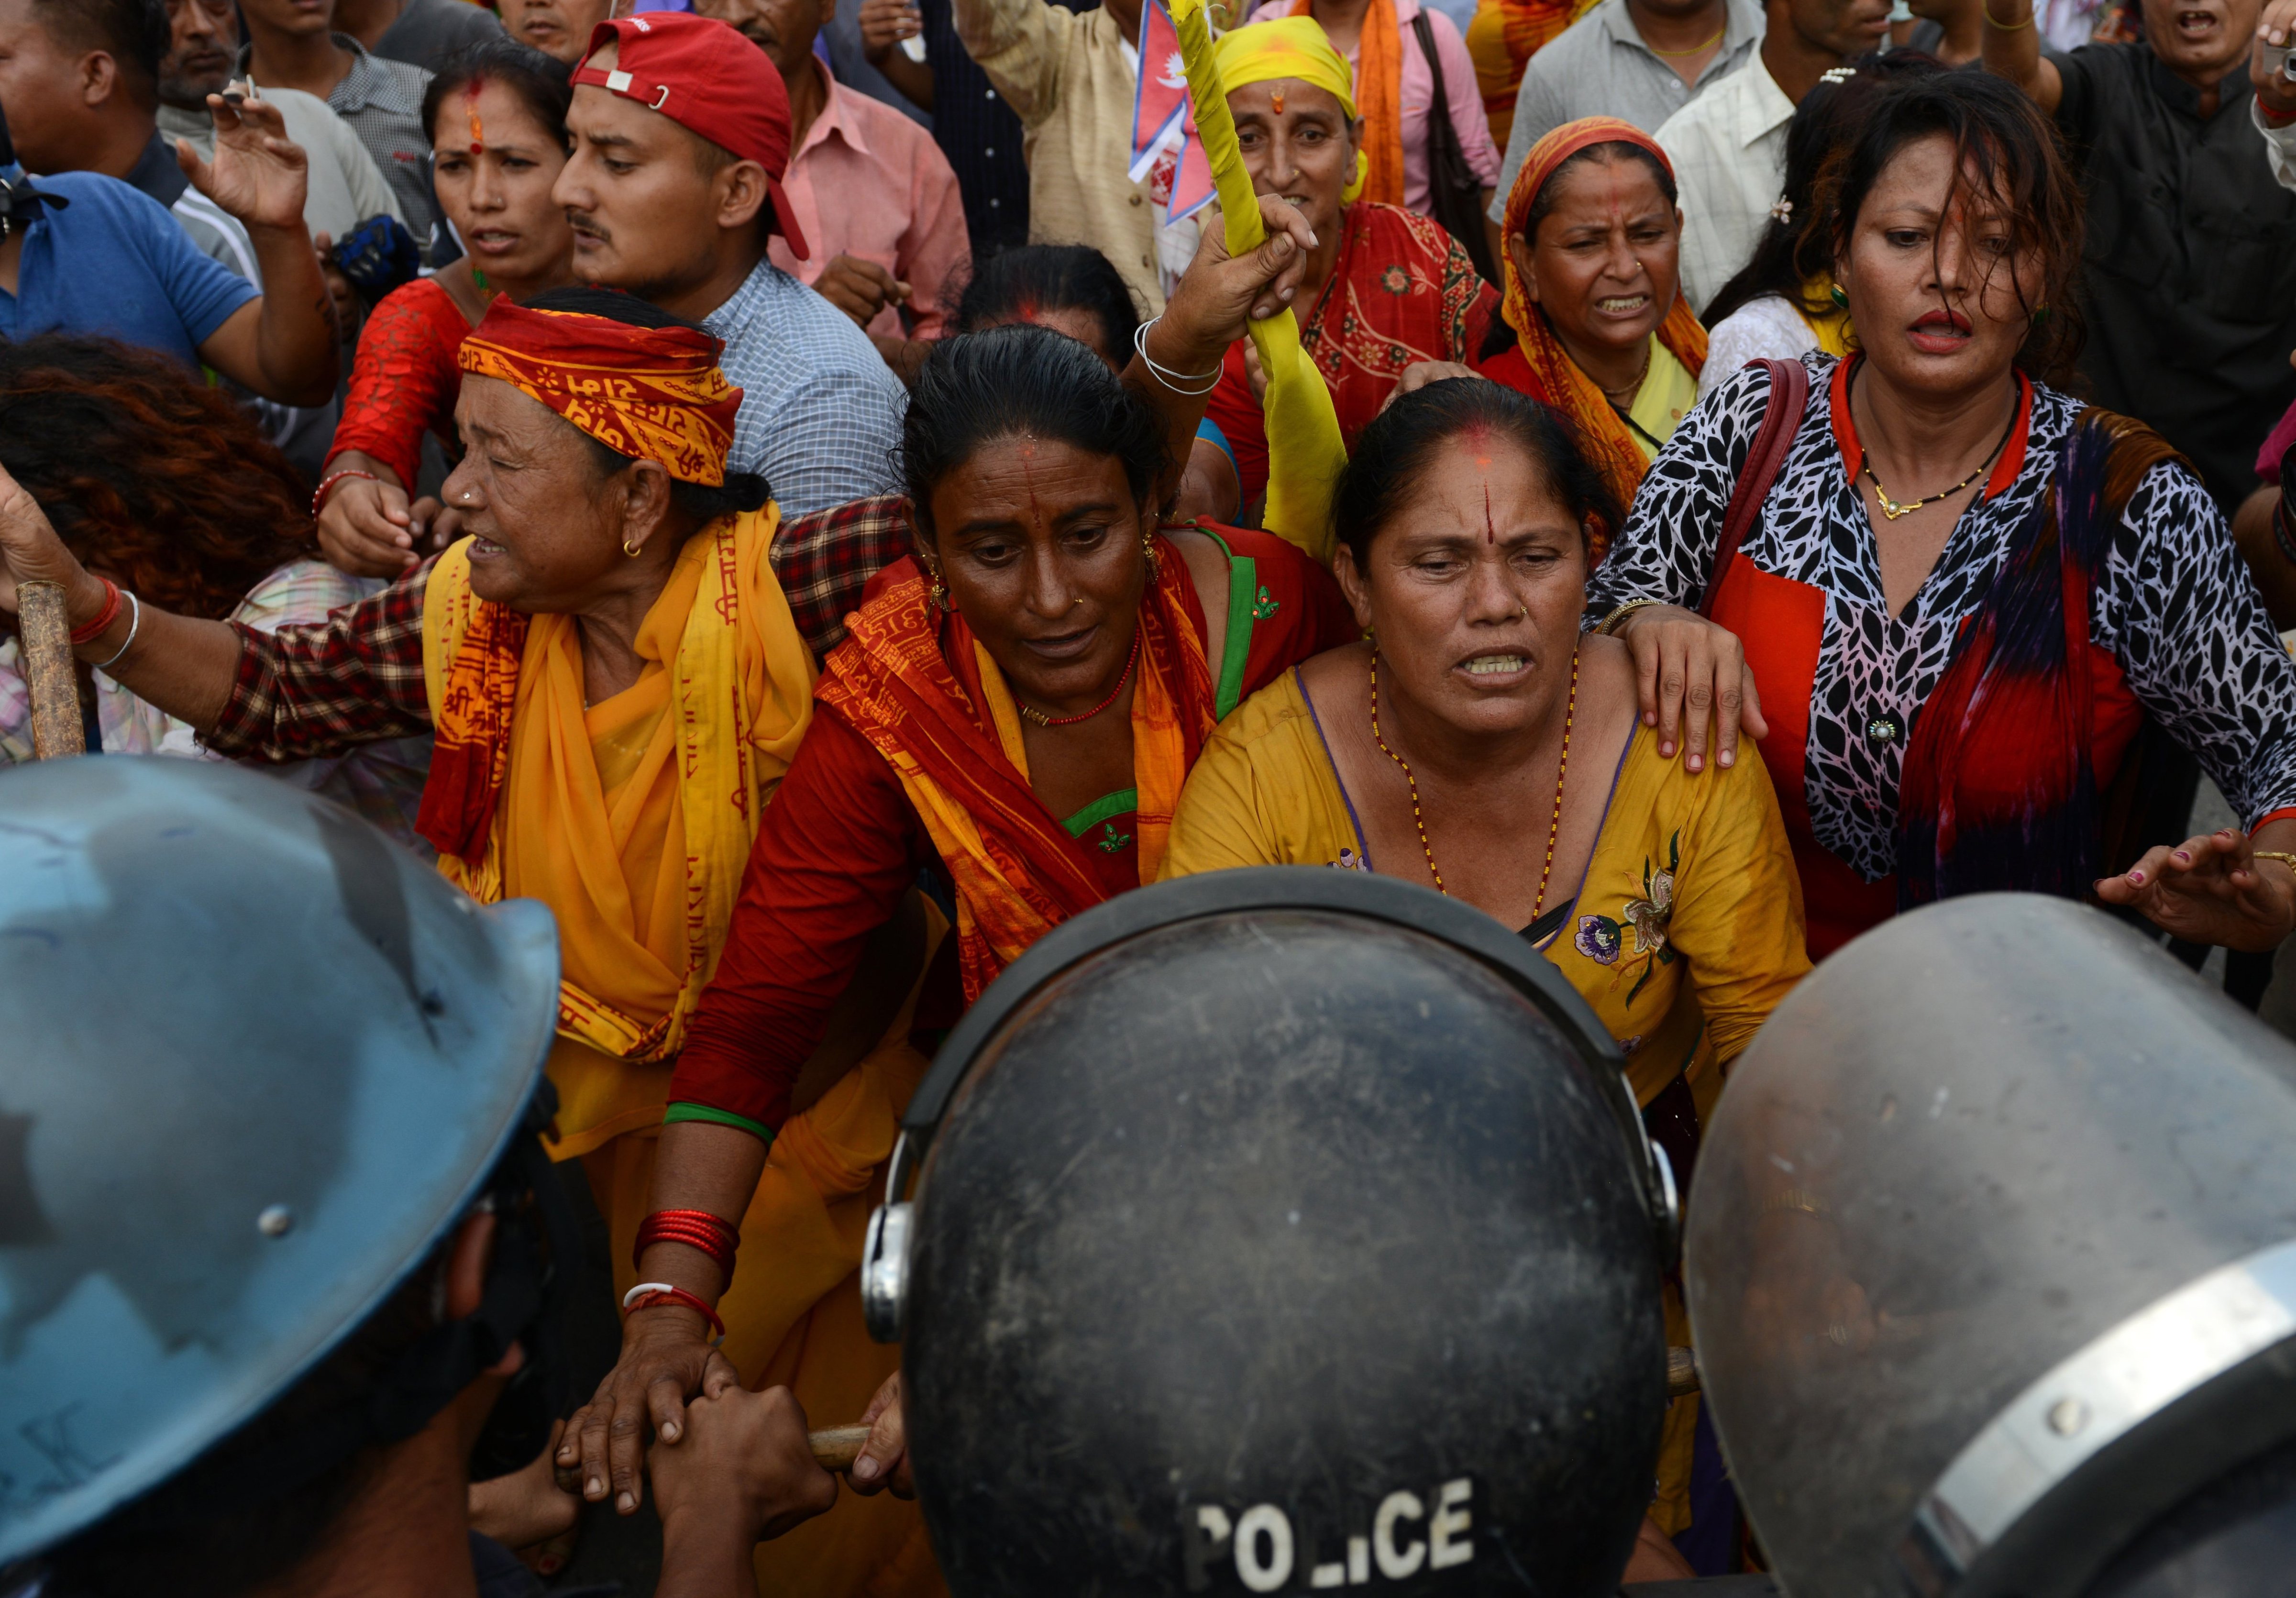 Nepalese police stop Hindu activists as they try to break through to a cordoned-off area near parliament during a protest demanding Nepal be declared a Hindu state in Kathmandu on Sept. 1, 2015 (Prakash Mathema—AFP/Getty Images)